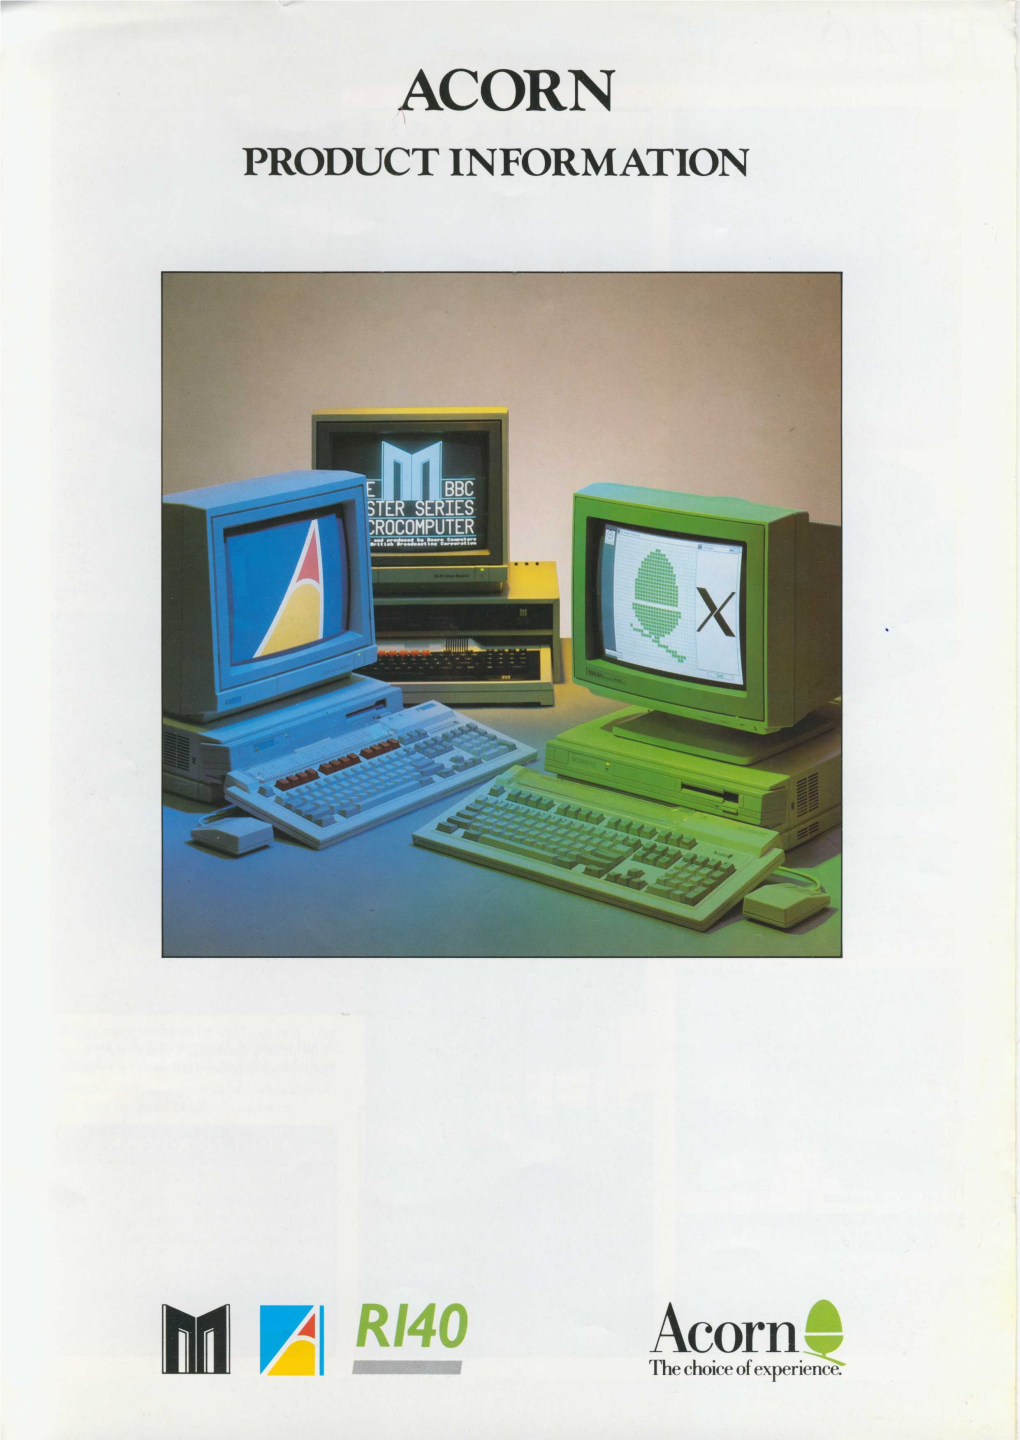 APP218 Acorn Product Information 1St Edition February 1989